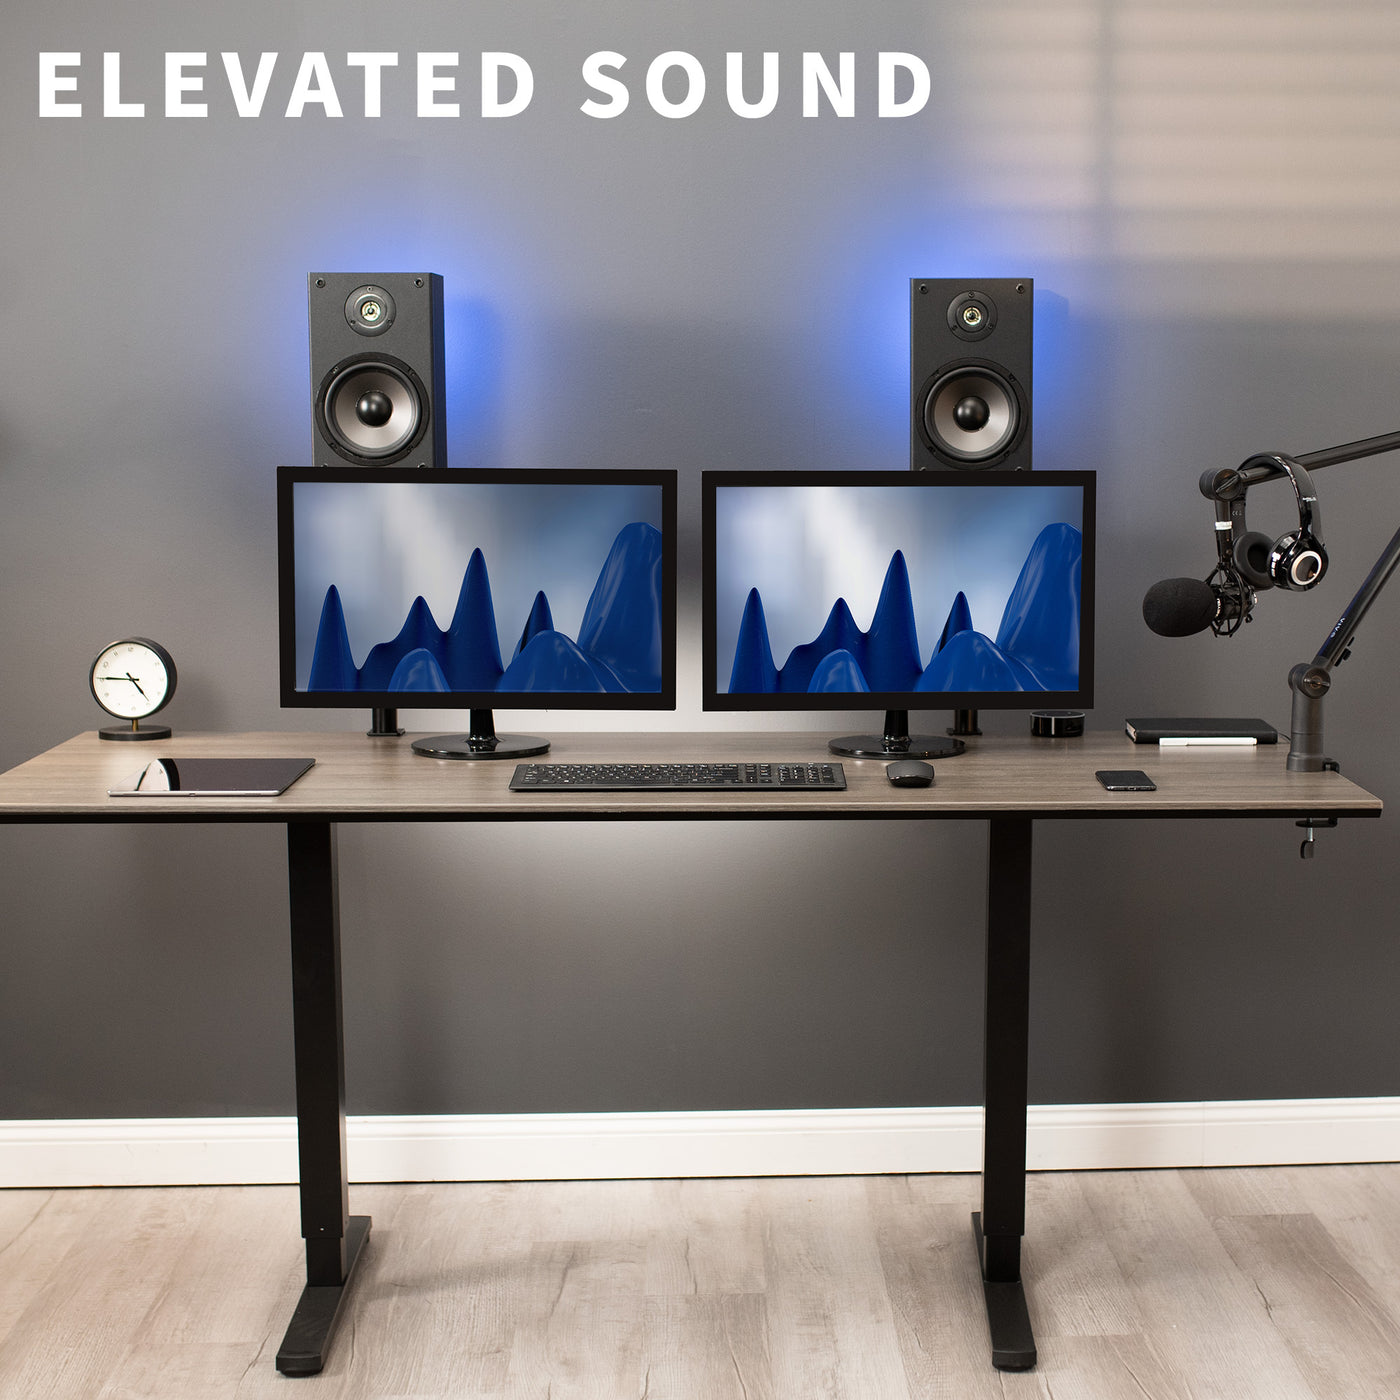 Elevate your sound system with dual black clamps on speaker mounts.